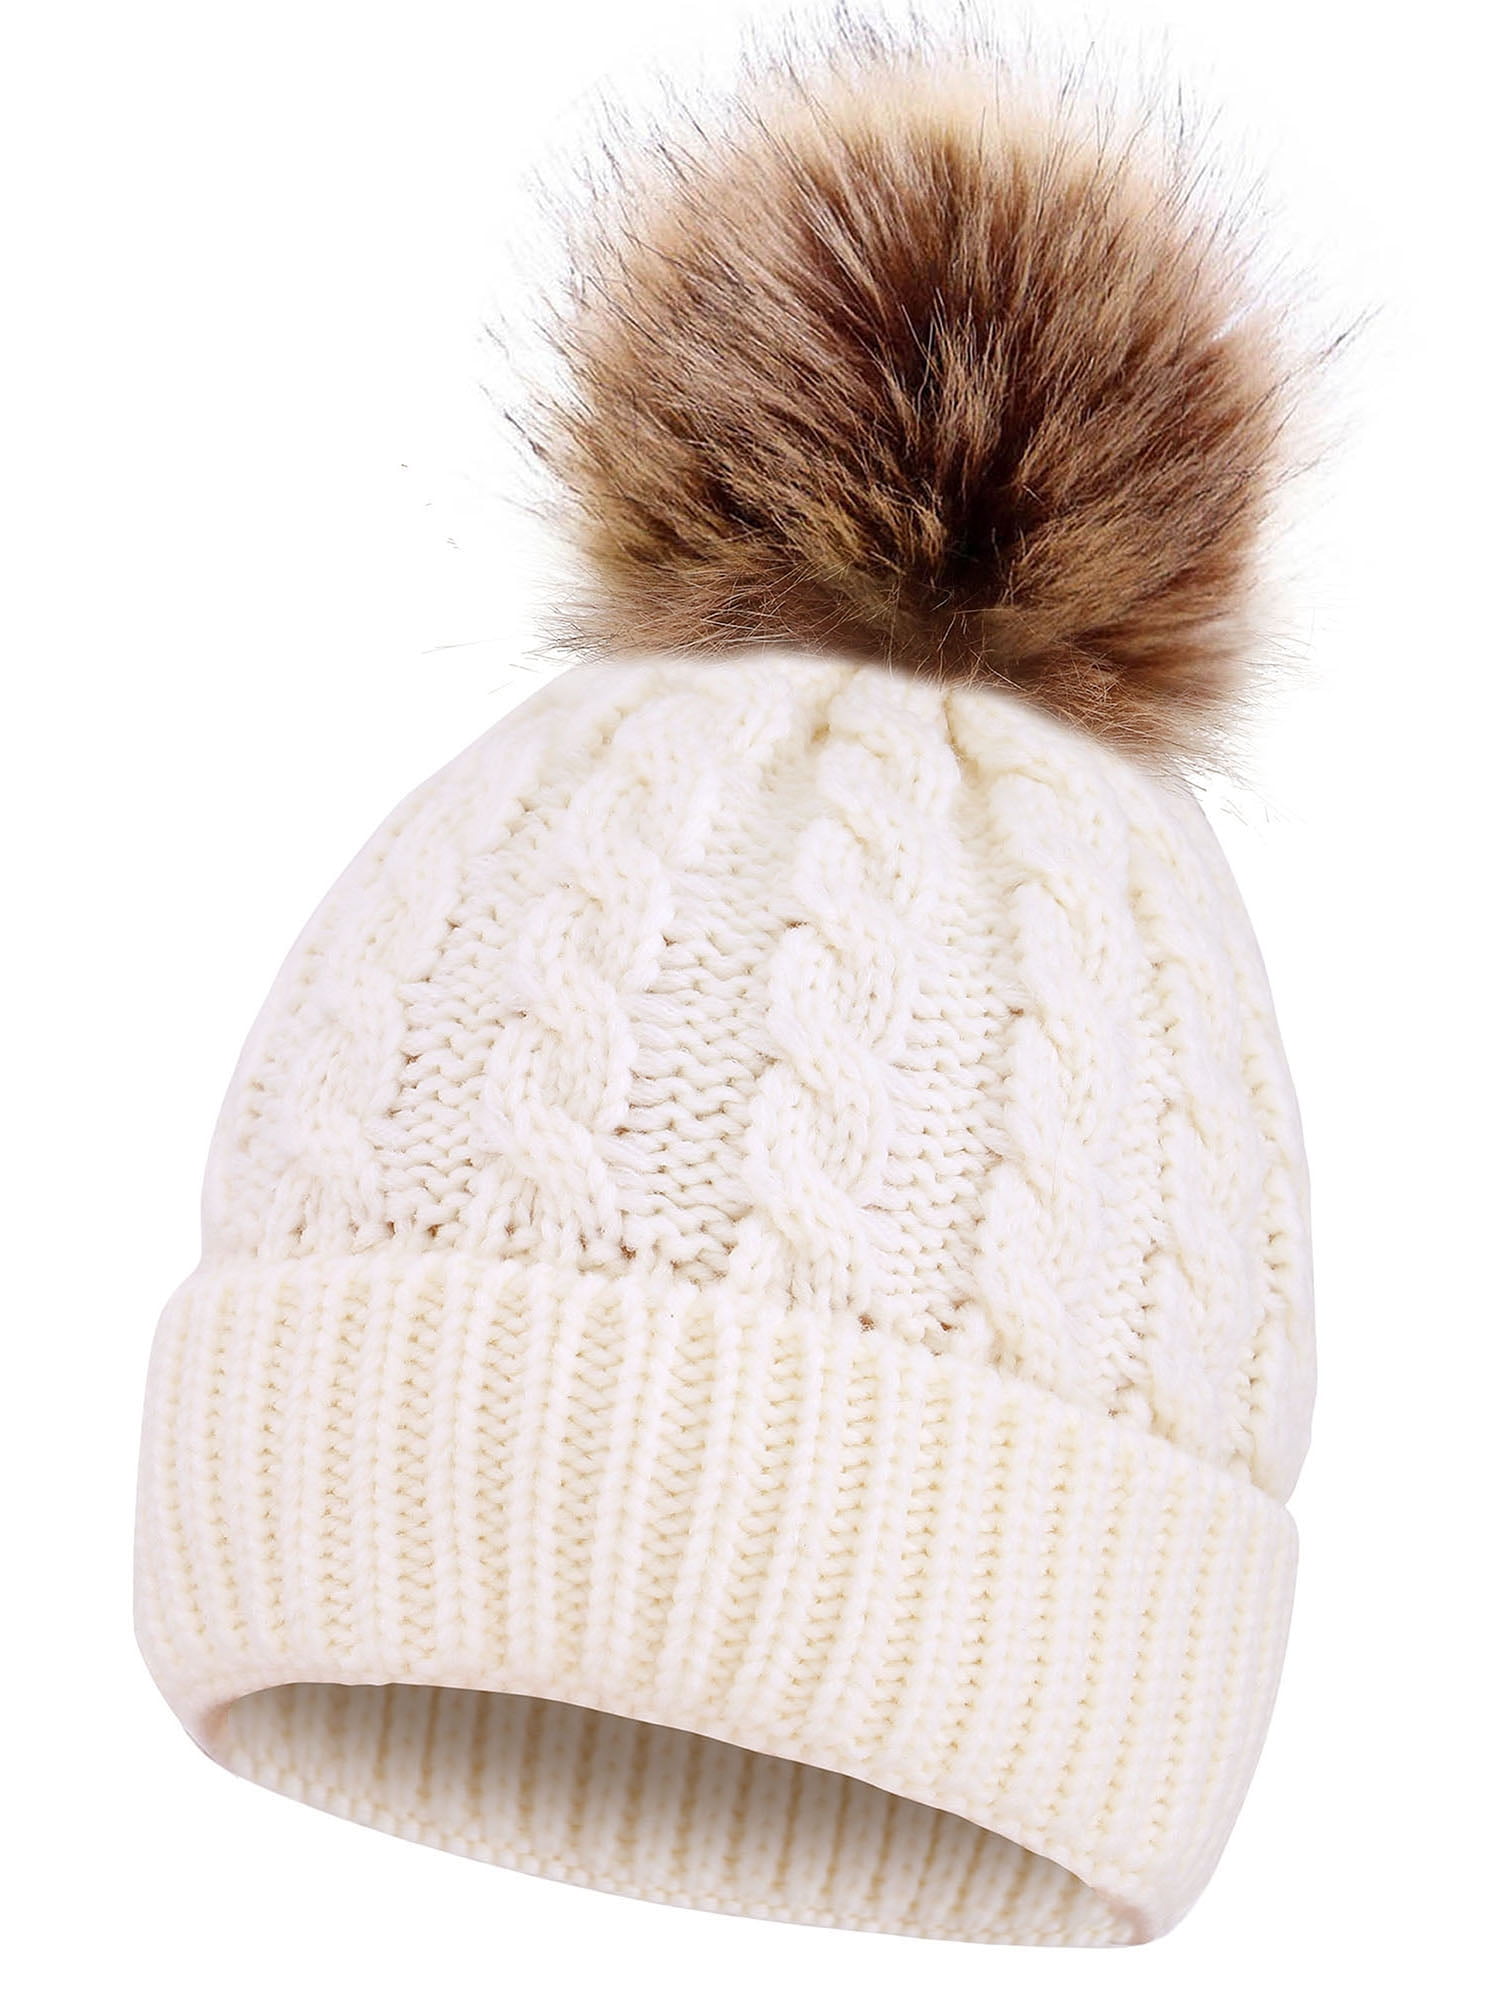 GRAMONI Women's Winter Ribbed Knit Faux Fur Pompoms Chunky Lined Beanie Hats 